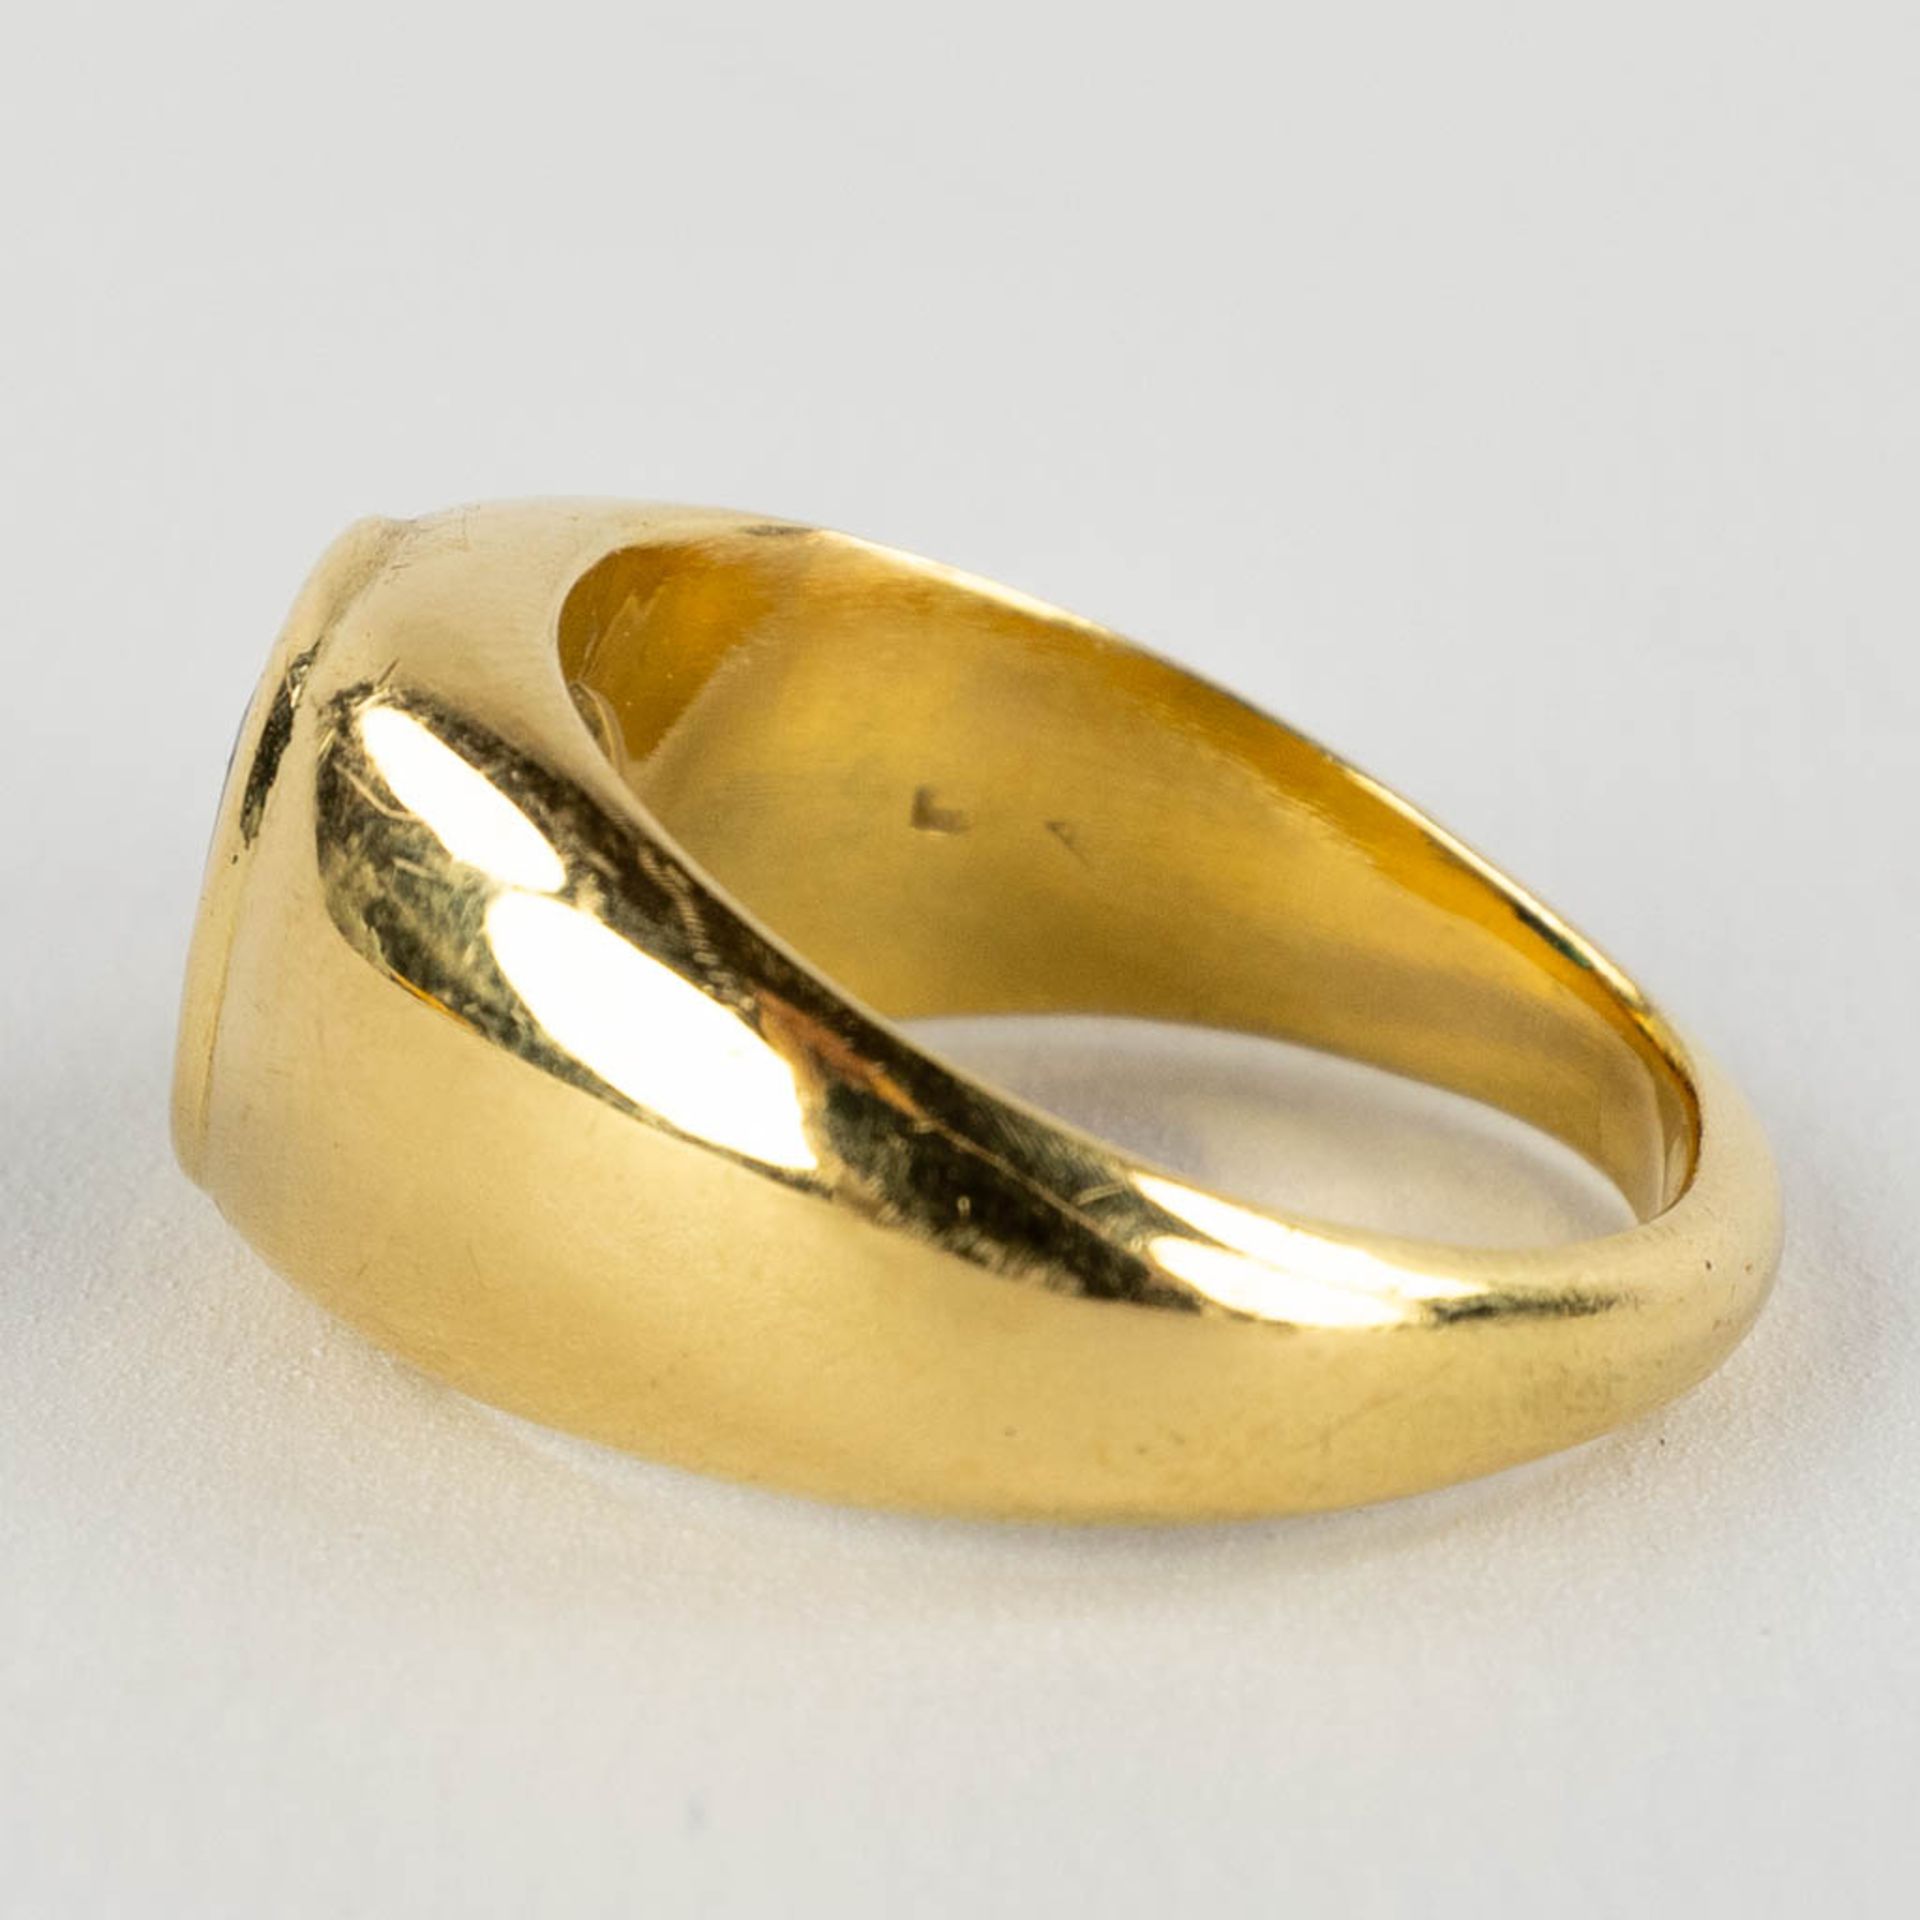 A yellow gold ring with a large facetted sapphire. 22,56g. - Image 6 of 9